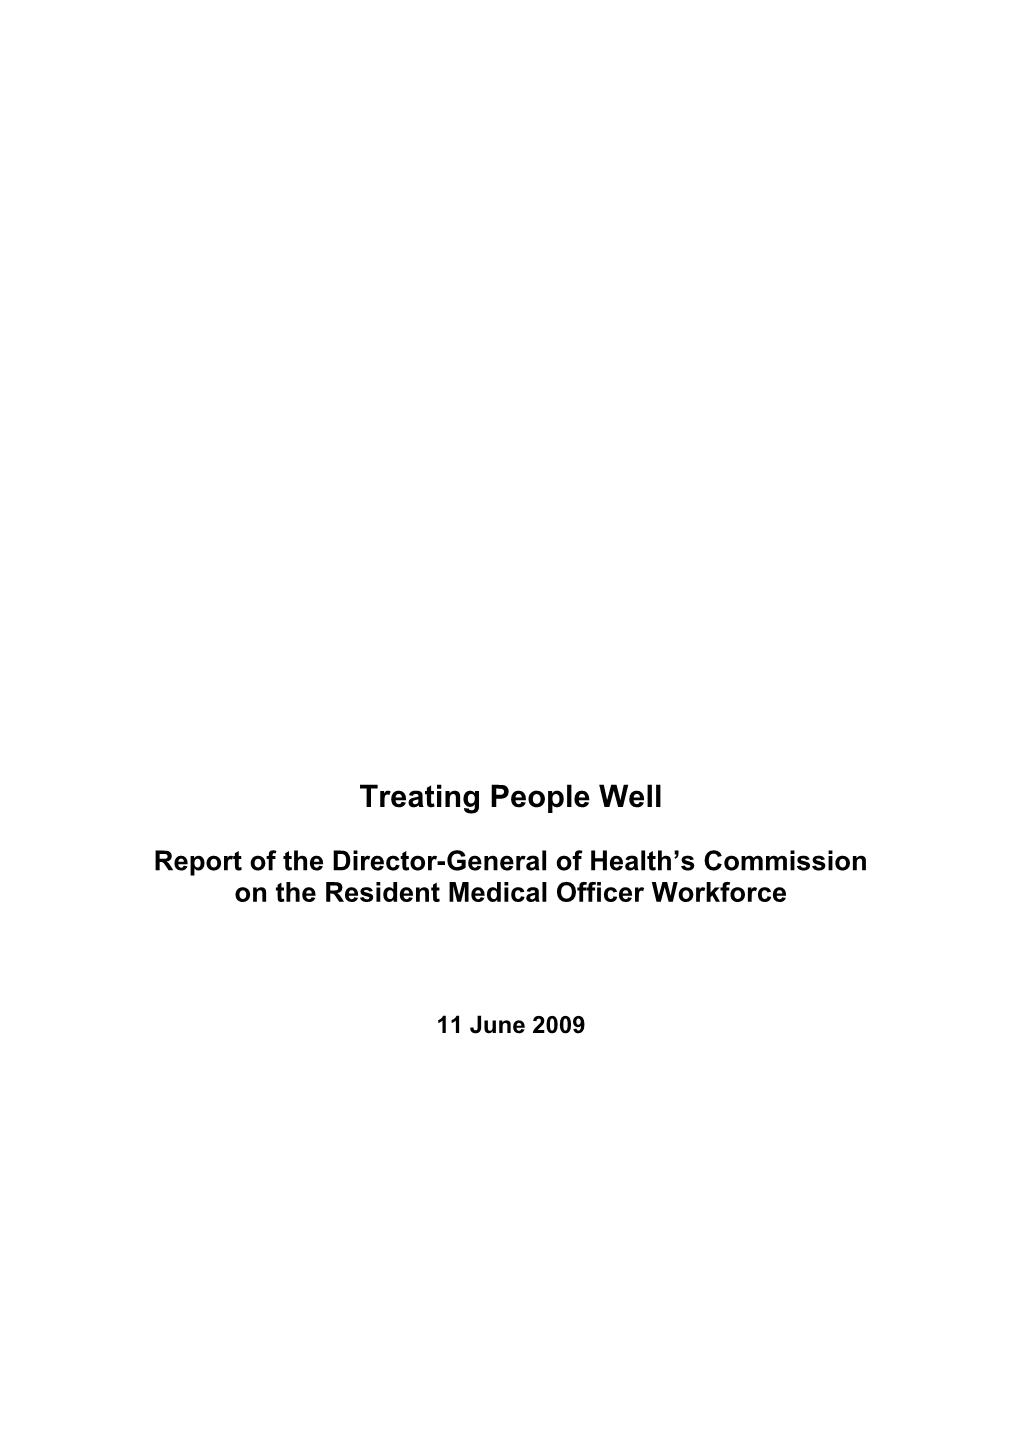 Report of the Director-General of Health S Commission on the Resident Medical Officer